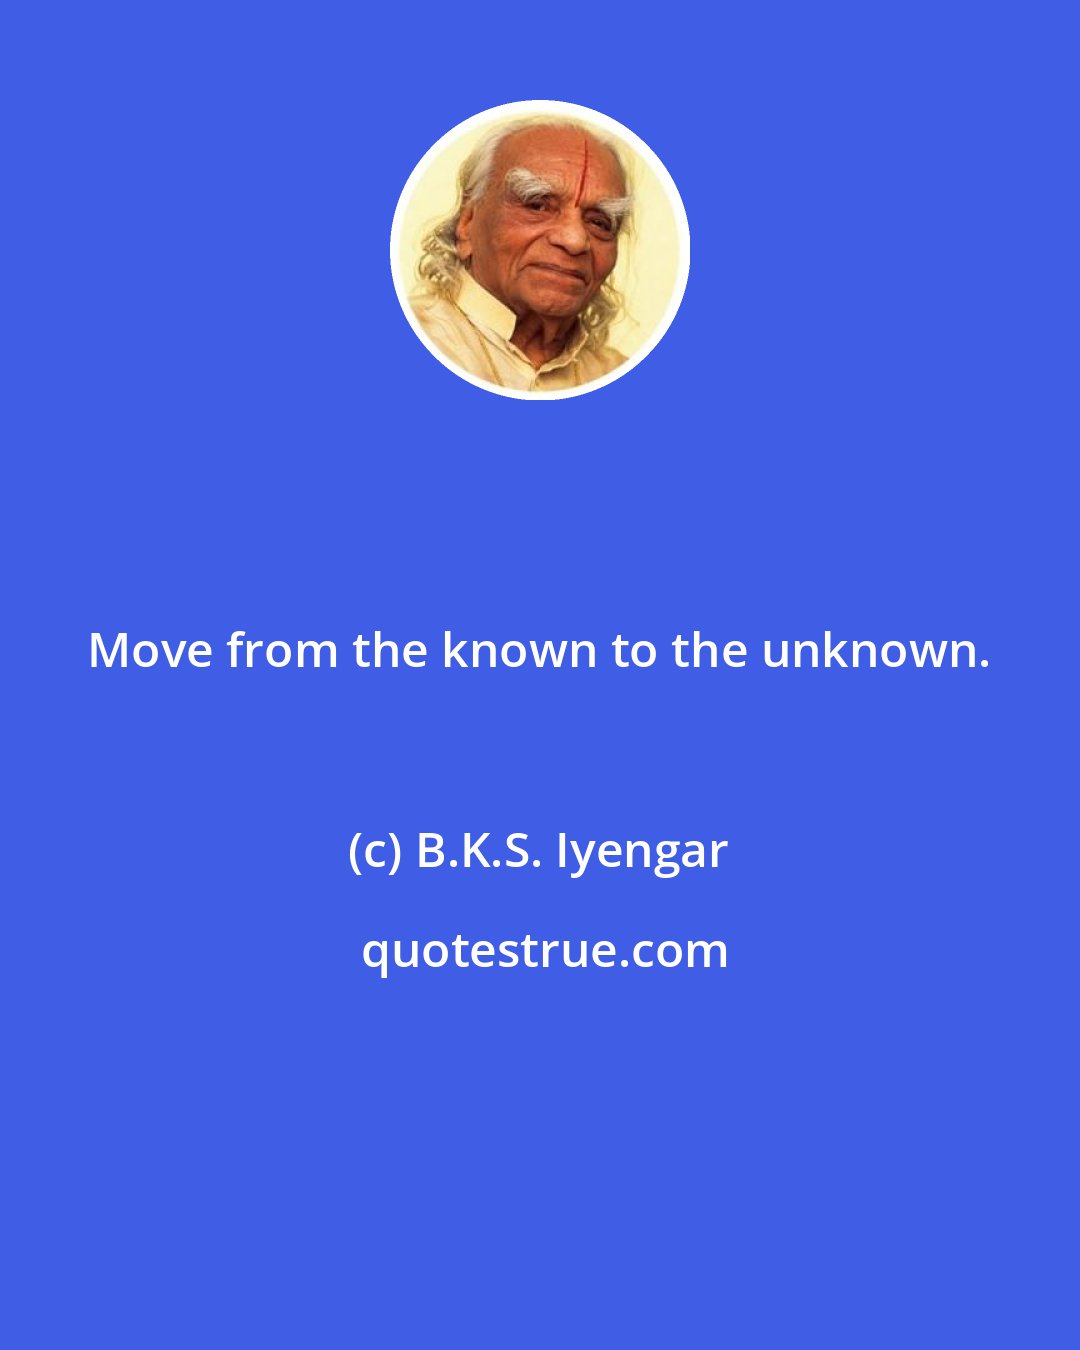 B.K.S. Iyengar: Move from the known to the unknown.